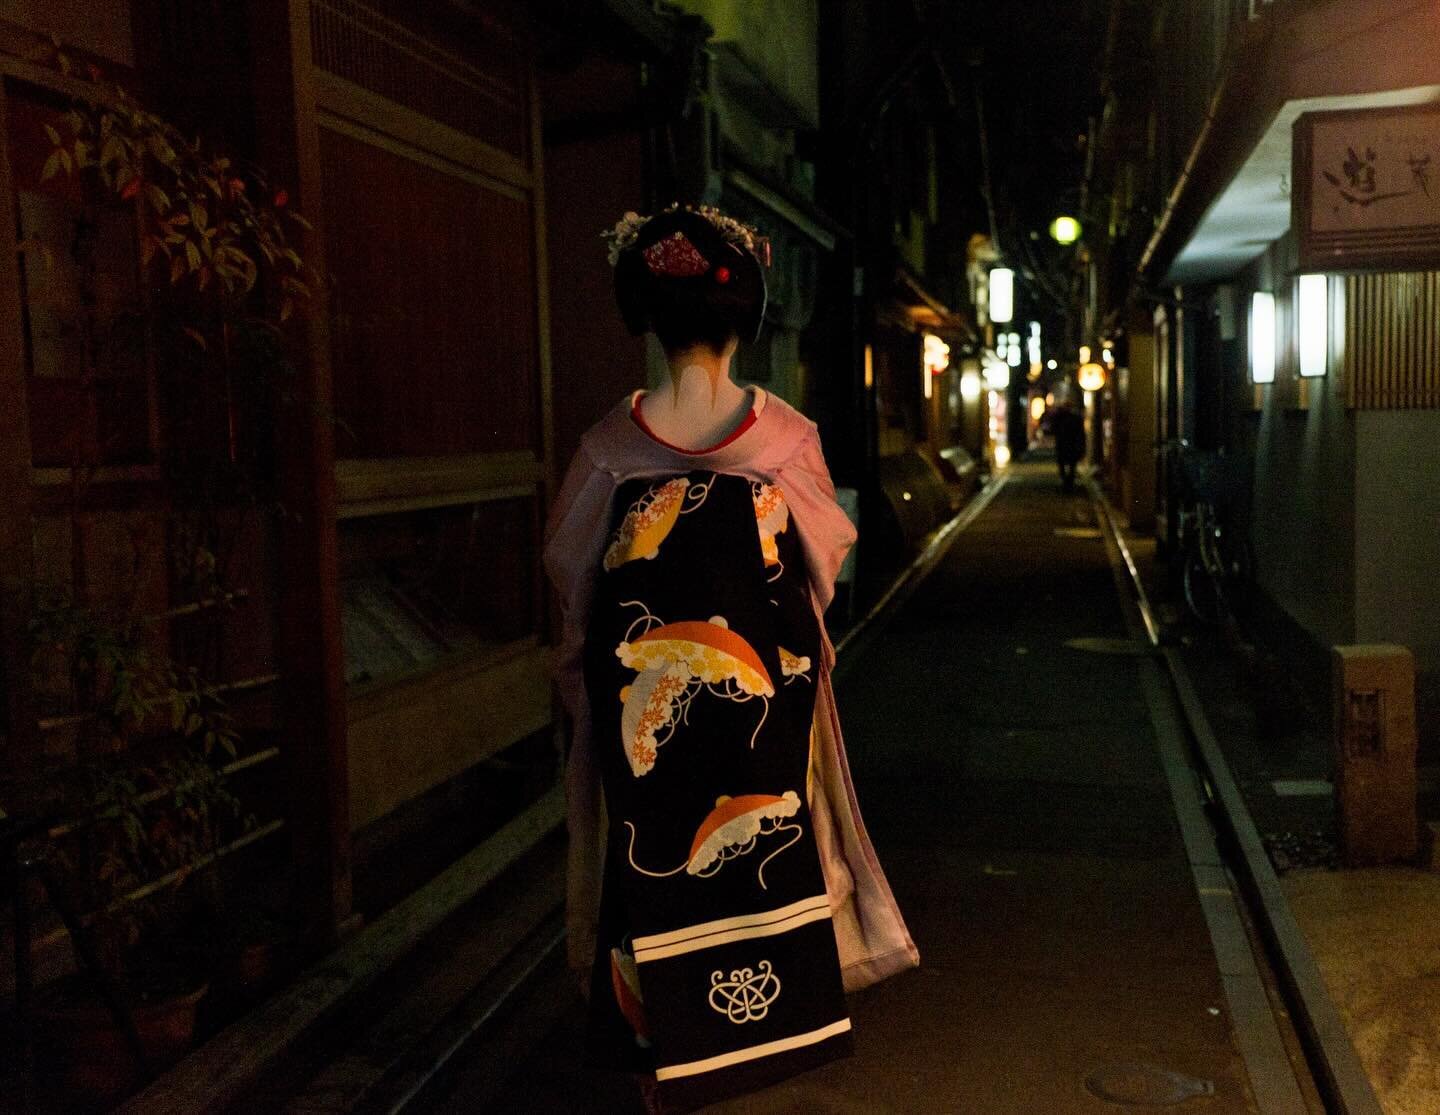 Exploring Tokyo and Kyoto by night is magical. Encountered a geisha, gracefully appearing like a ghost from the past of the ancient city. Amid bustling streets, lonely souls seek connection. A group of men gathers. The night unfolds, revealing the he